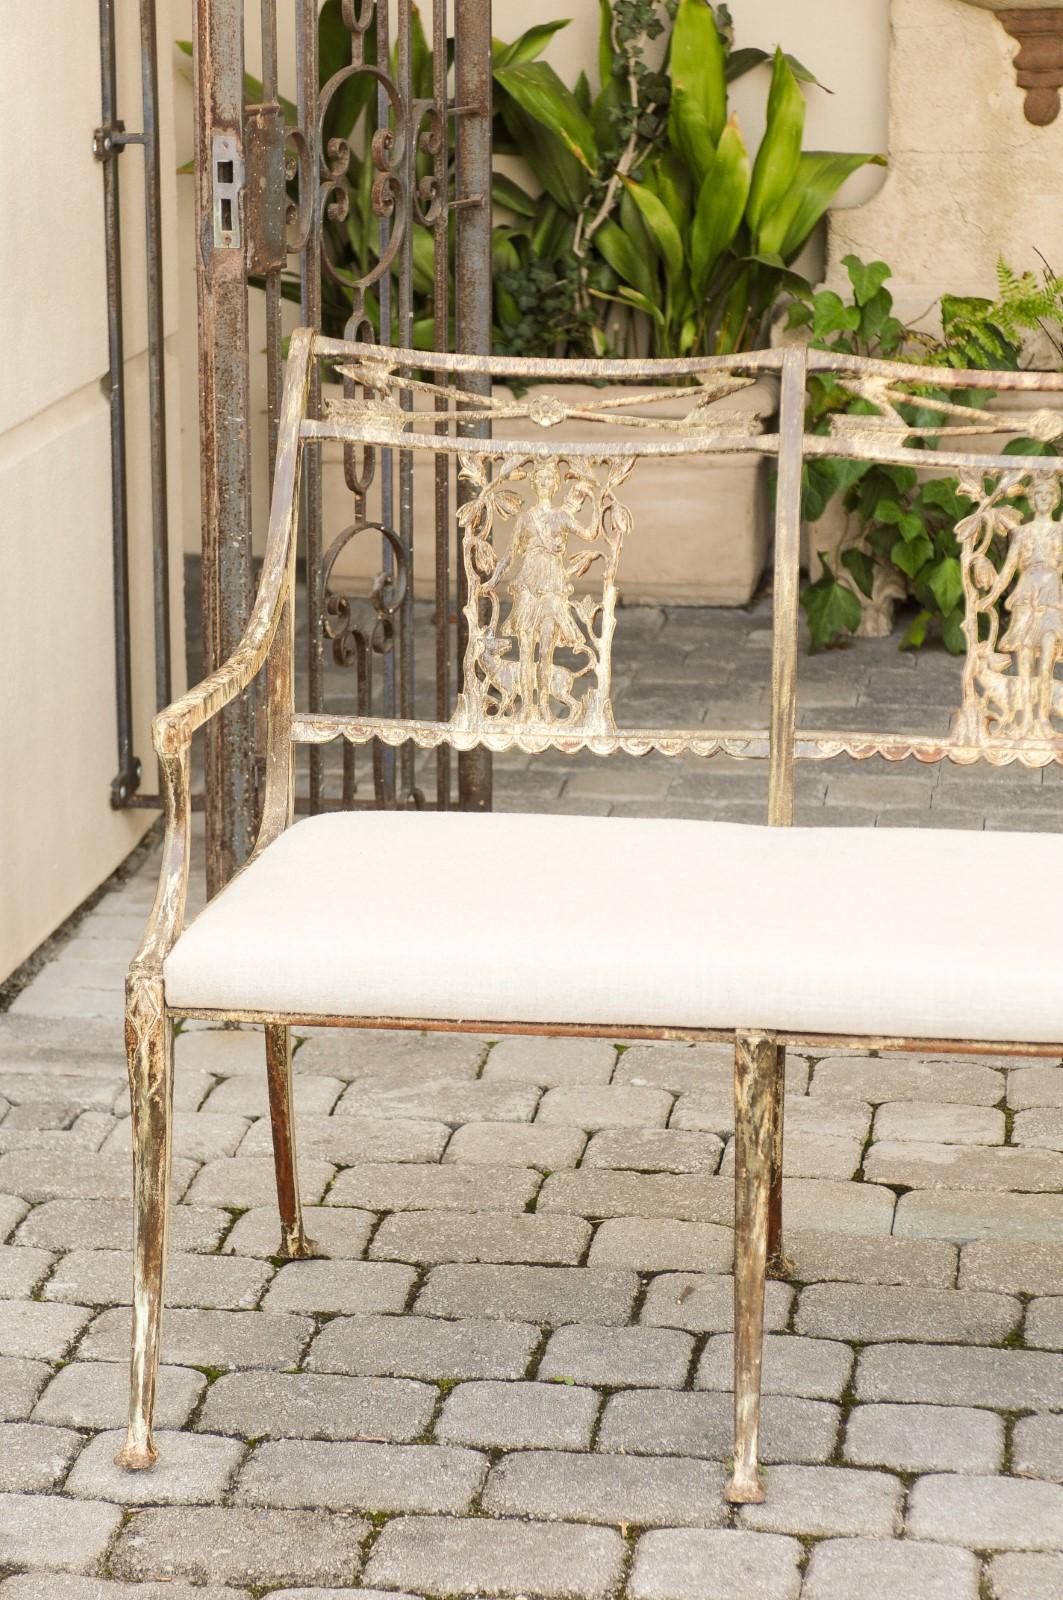 Vintage Wrought-Iron Diana the Huntress Pattern Garden Bench with Upholstery In Good Condition For Sale In Atlanta, GA